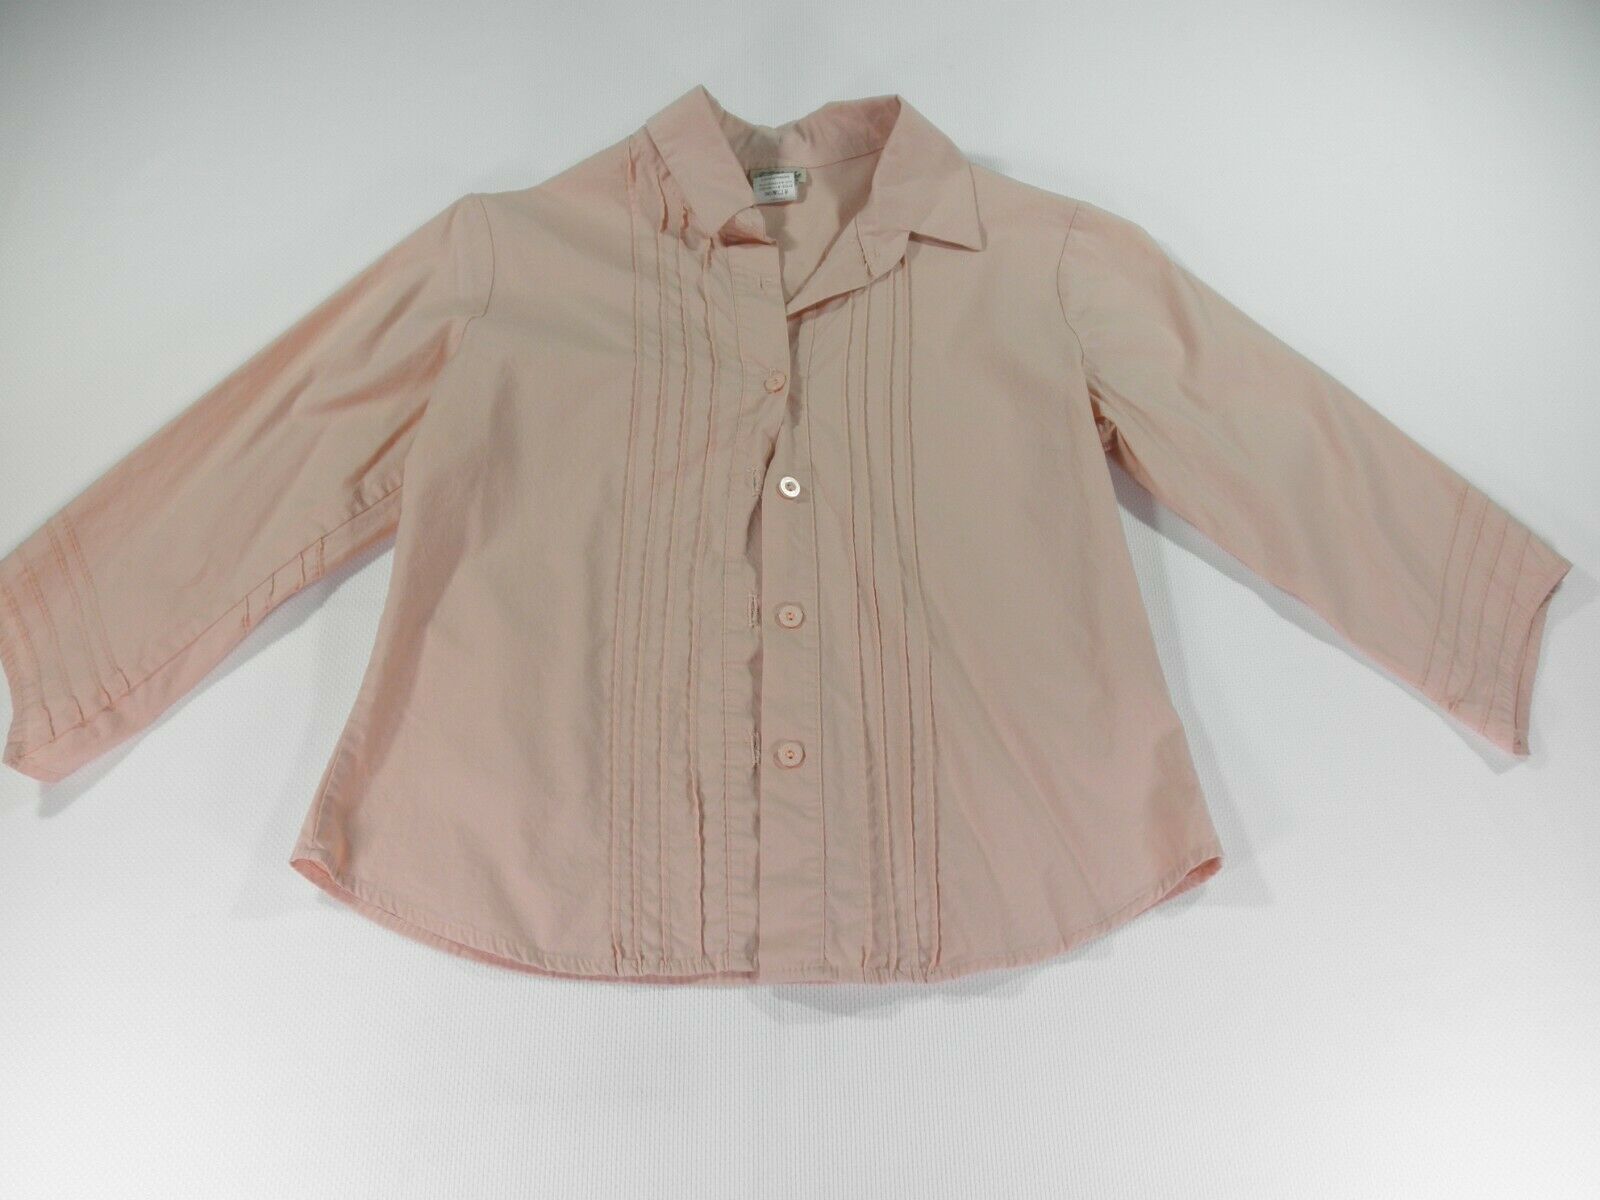 Primary image for True Light Womens Shirt Size Medium Long Sleeve Solid Pink Buttondown 3/4 Sleeve